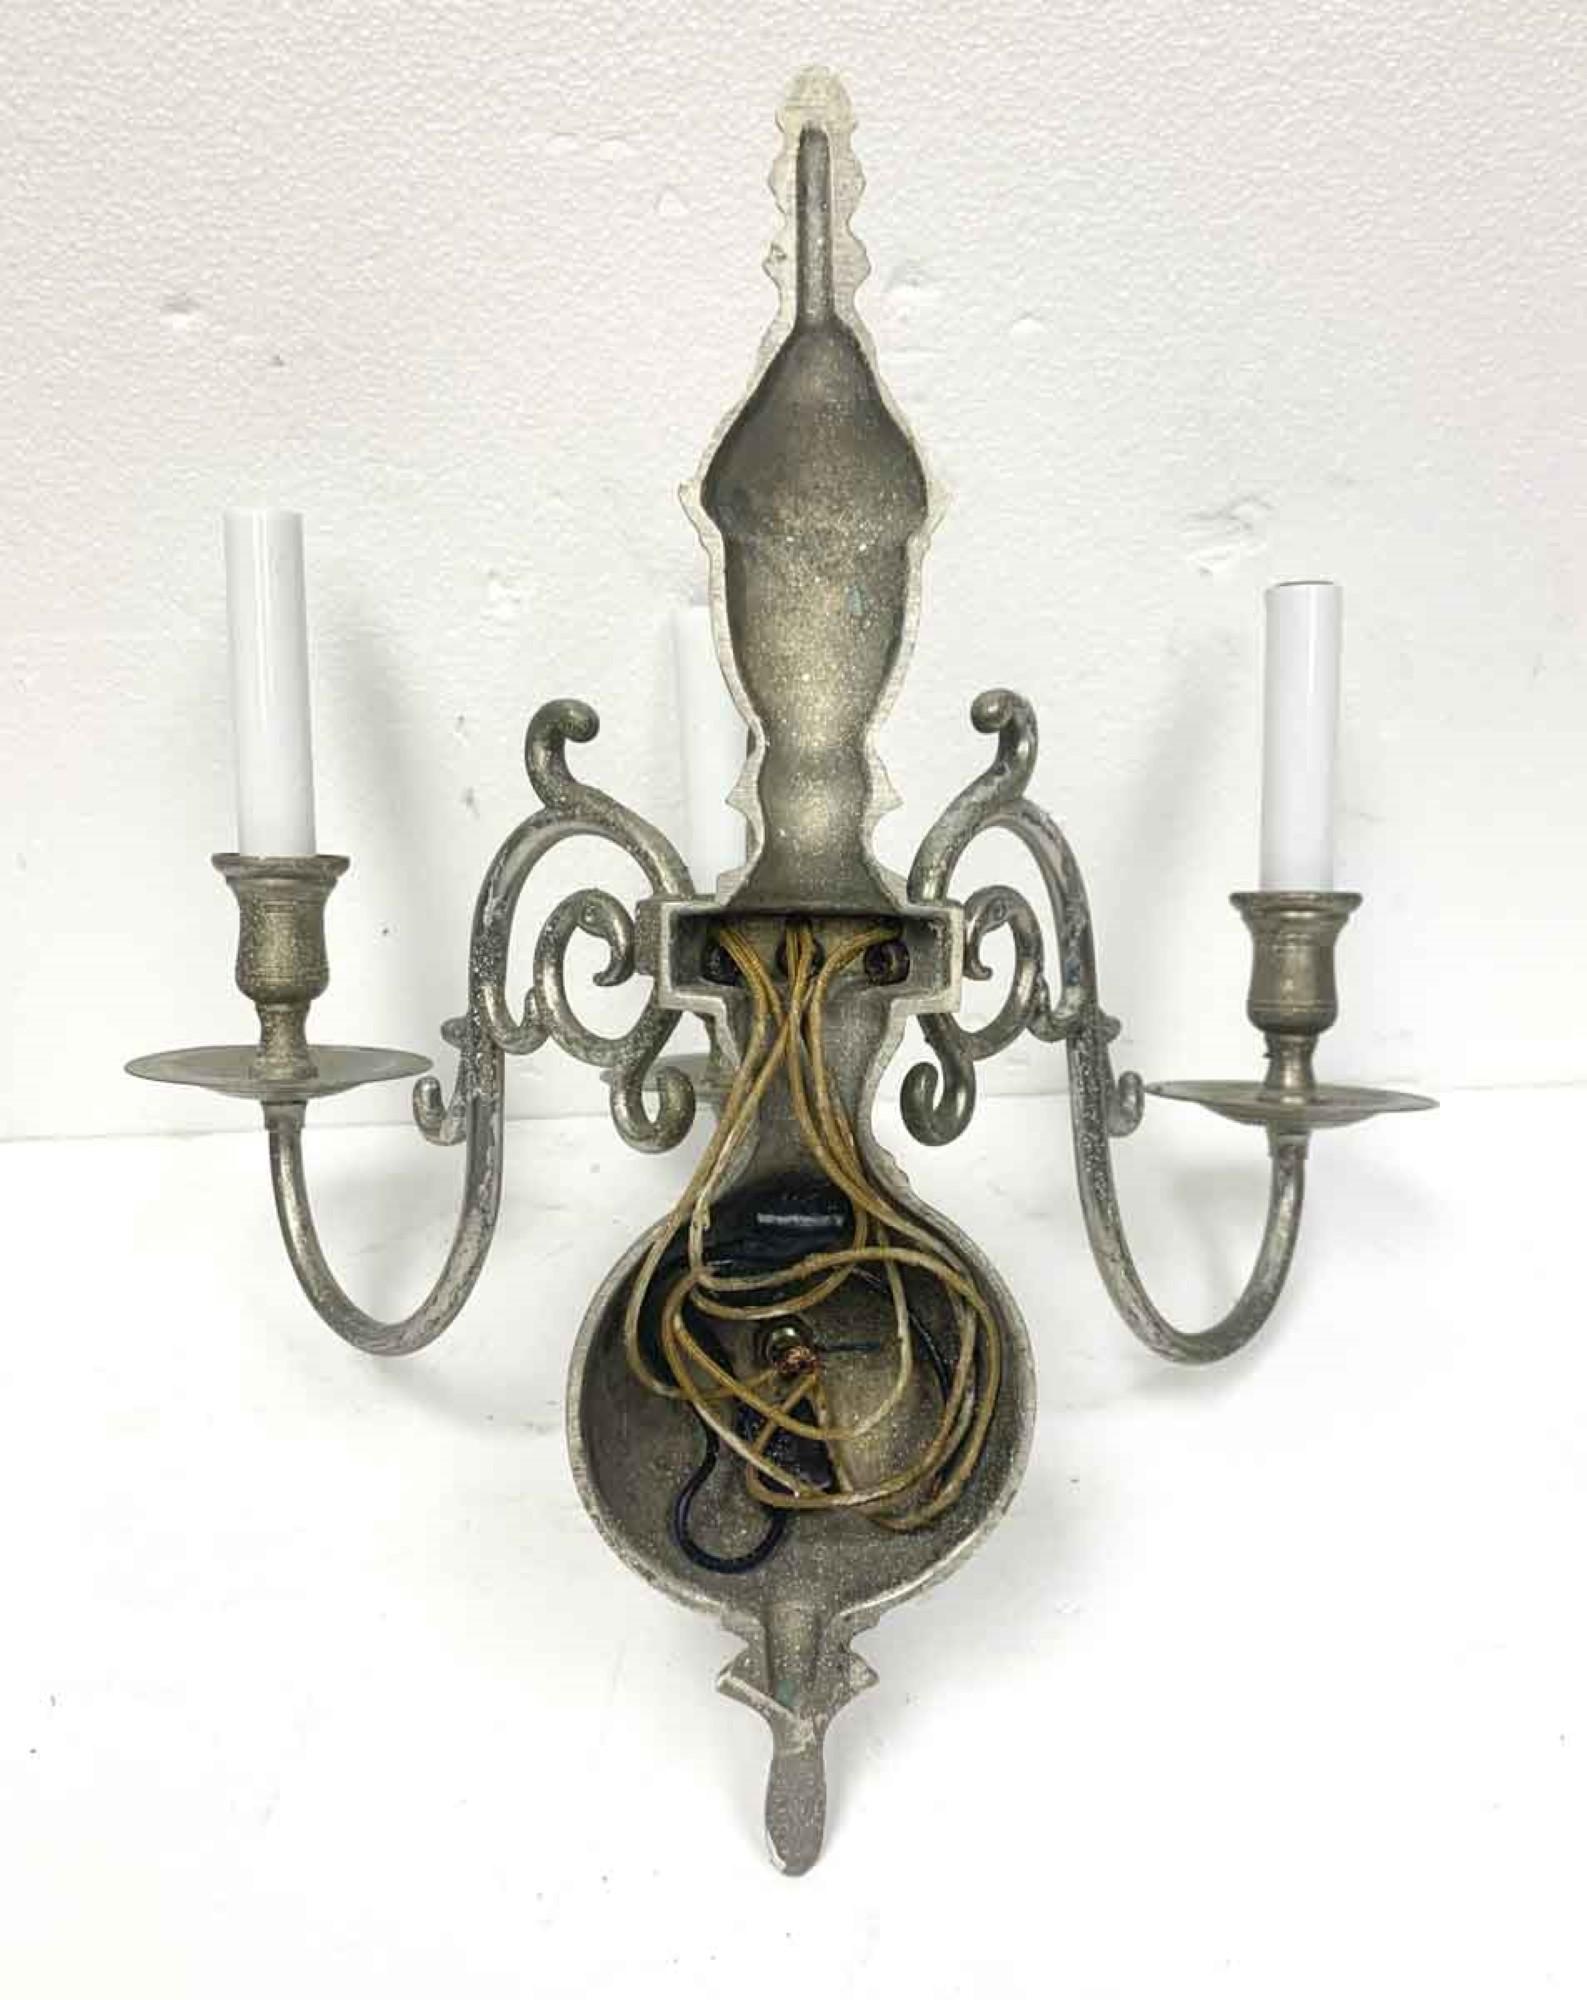 20th Century Original Silver Over Brass Williamsburg Wall Sconce, Quantity Available For Sale